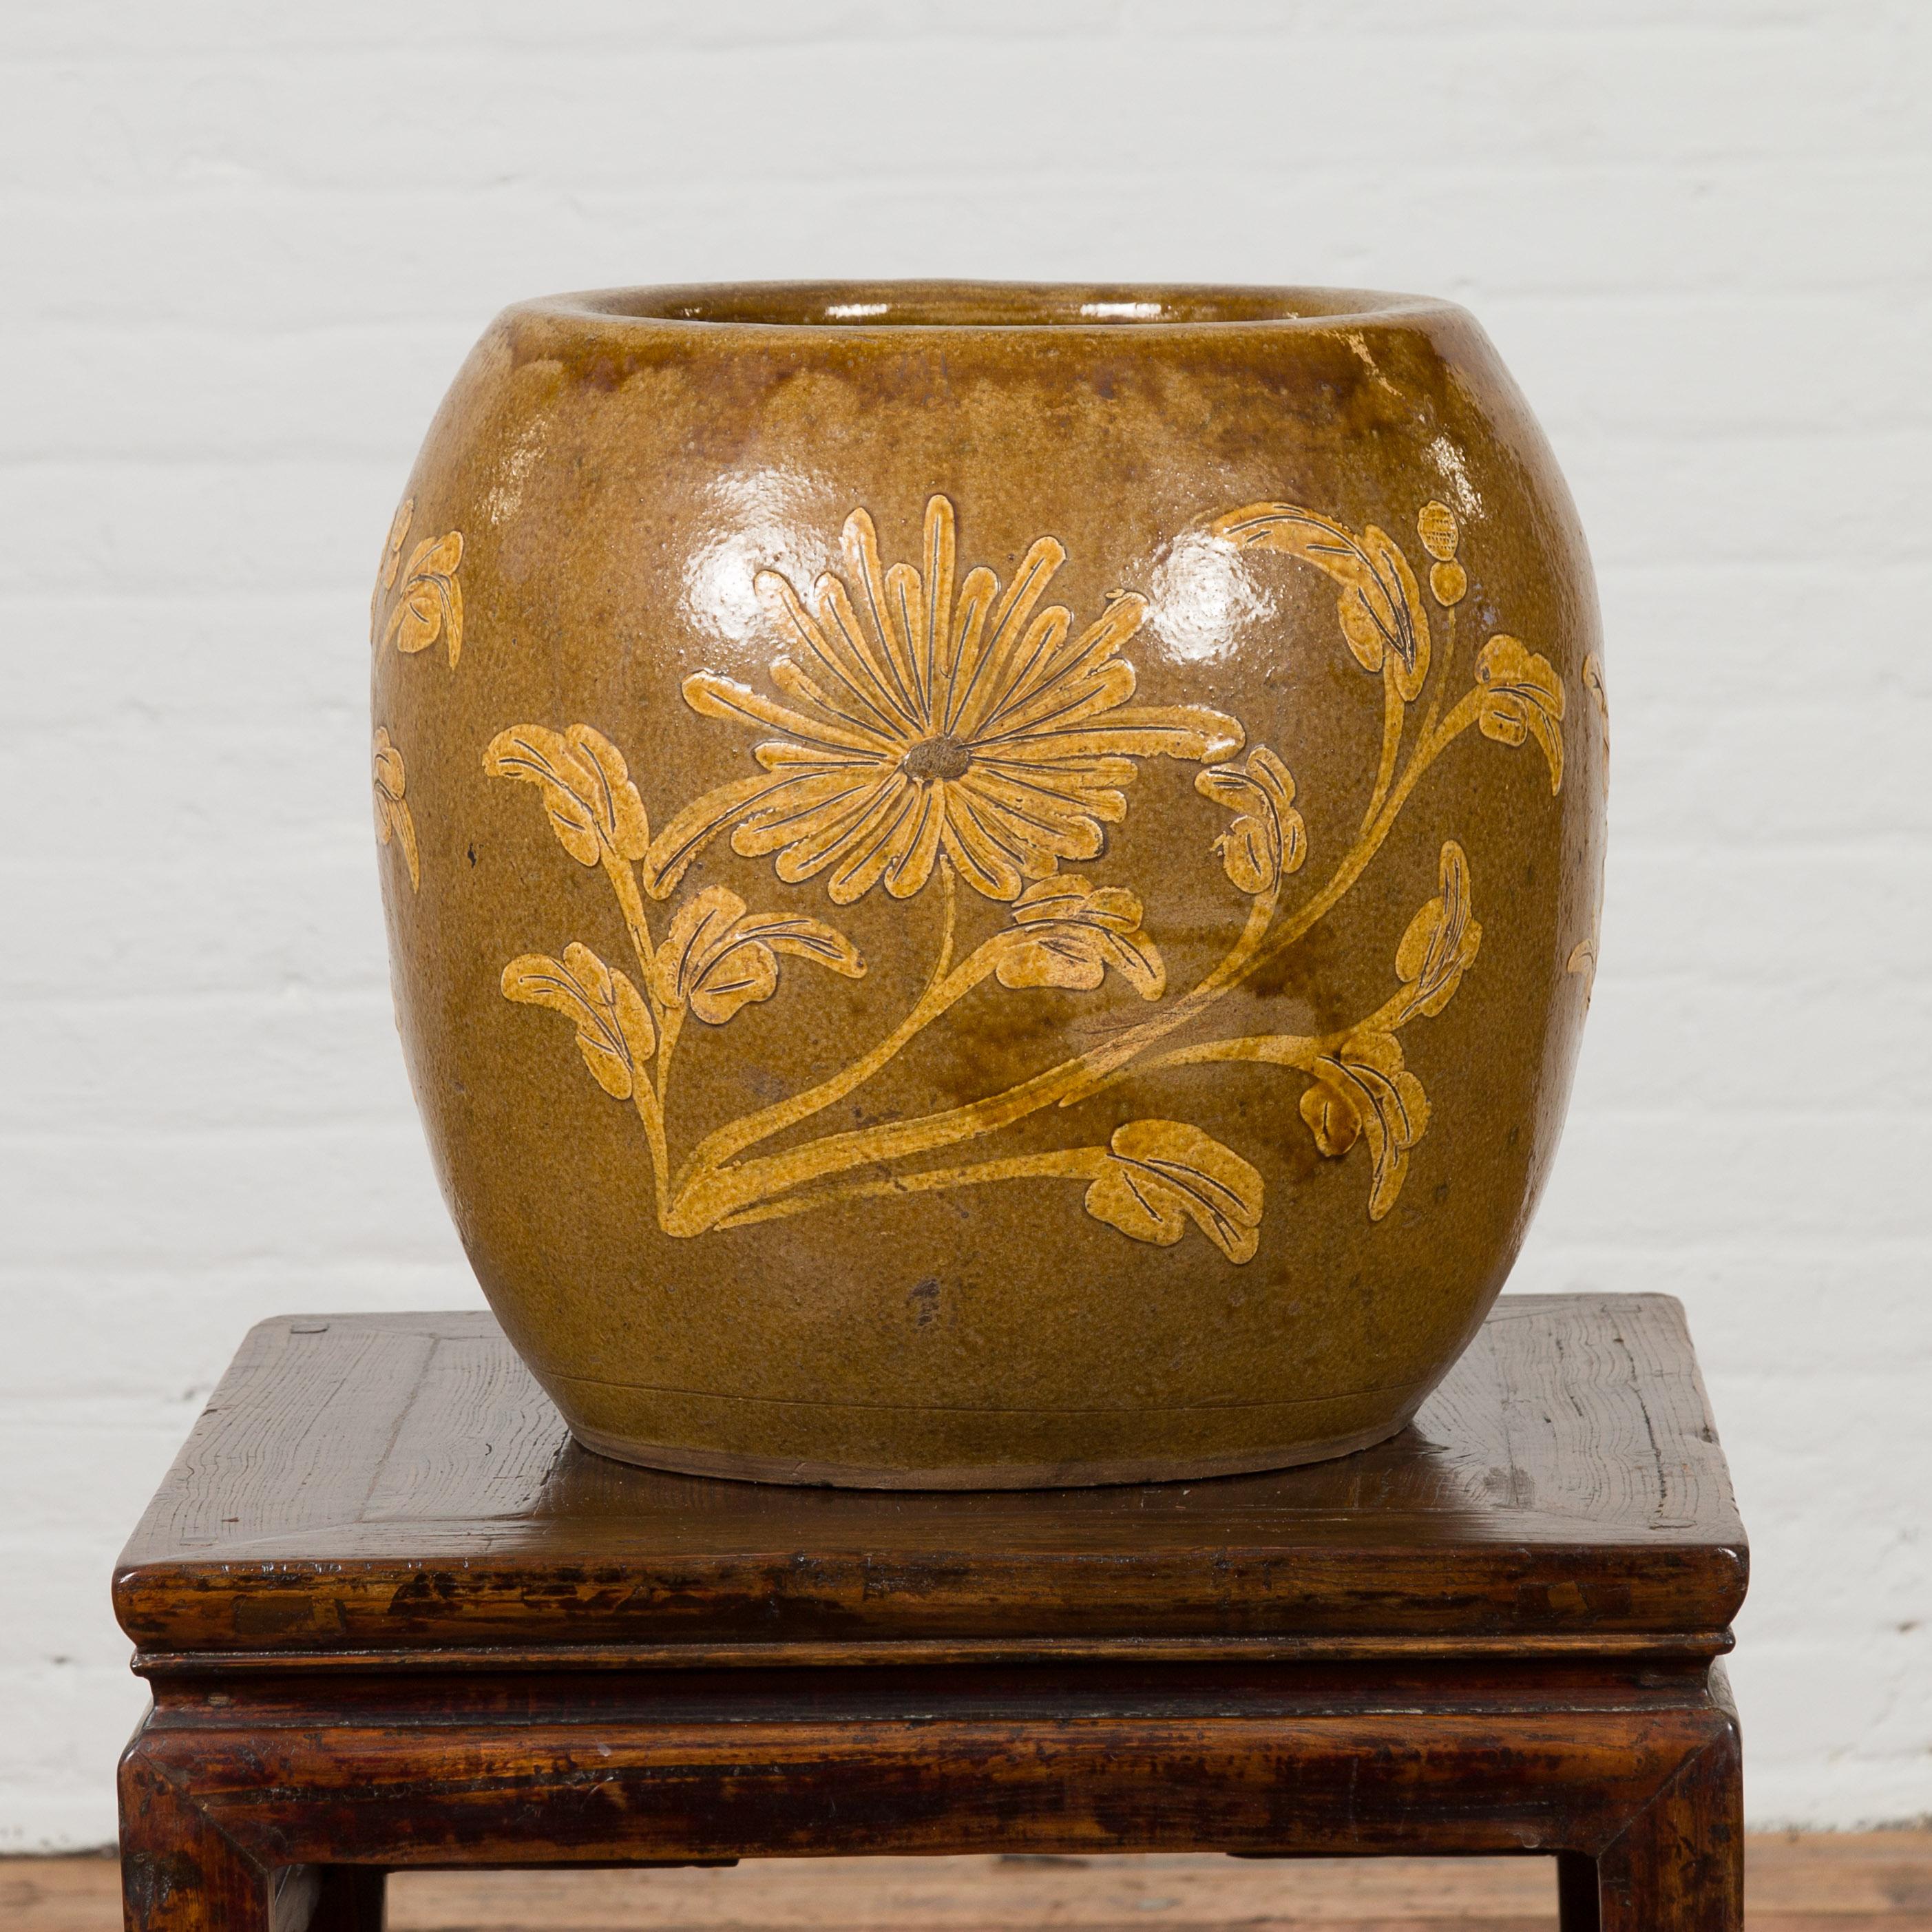 An antique Thai glazed ceramic planter from the 19th century, with floral motifs. Created in Thailand during the 19th century, this round planter showcases a brown ground accented with golden flowers on the belly. Glazed on the inside as well and